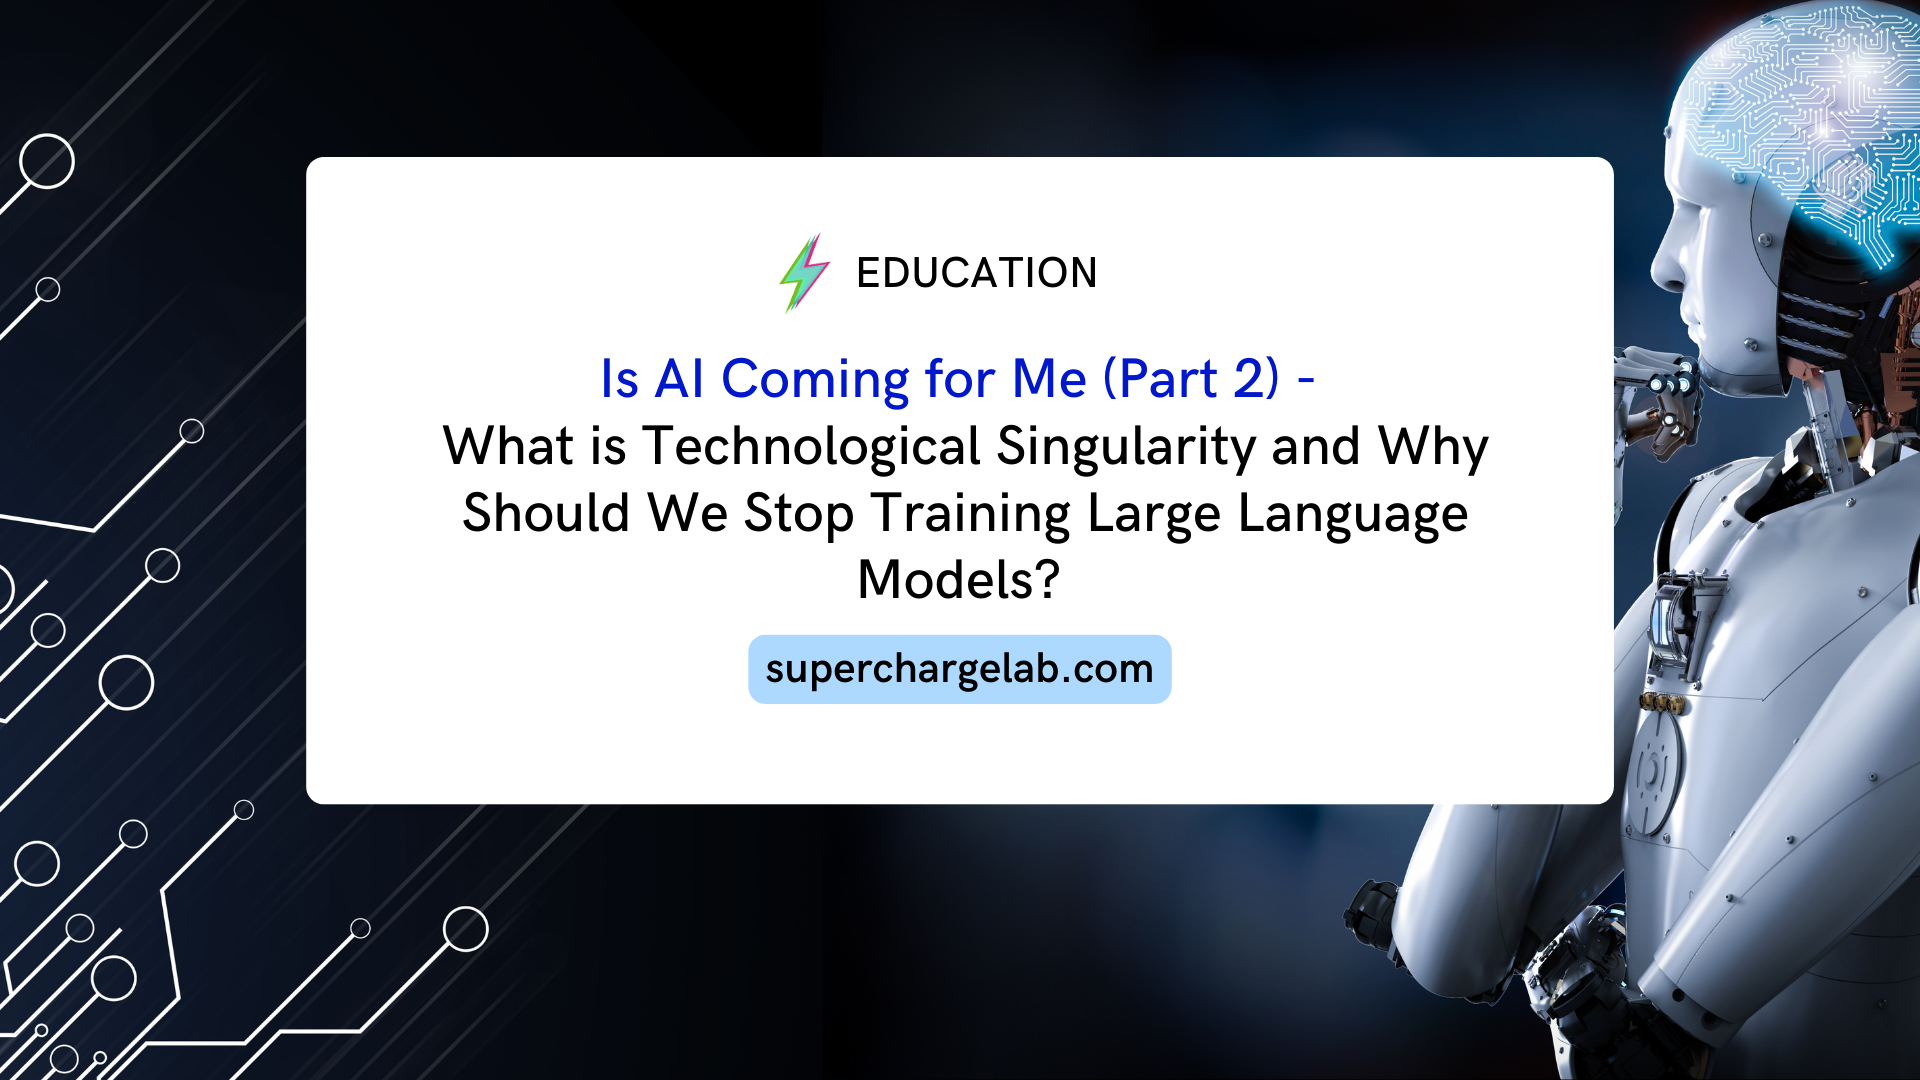 Is AI Coming for Me (Part 2) - What is Technological Singularity and Why Should We Stop Training Large Language Models?